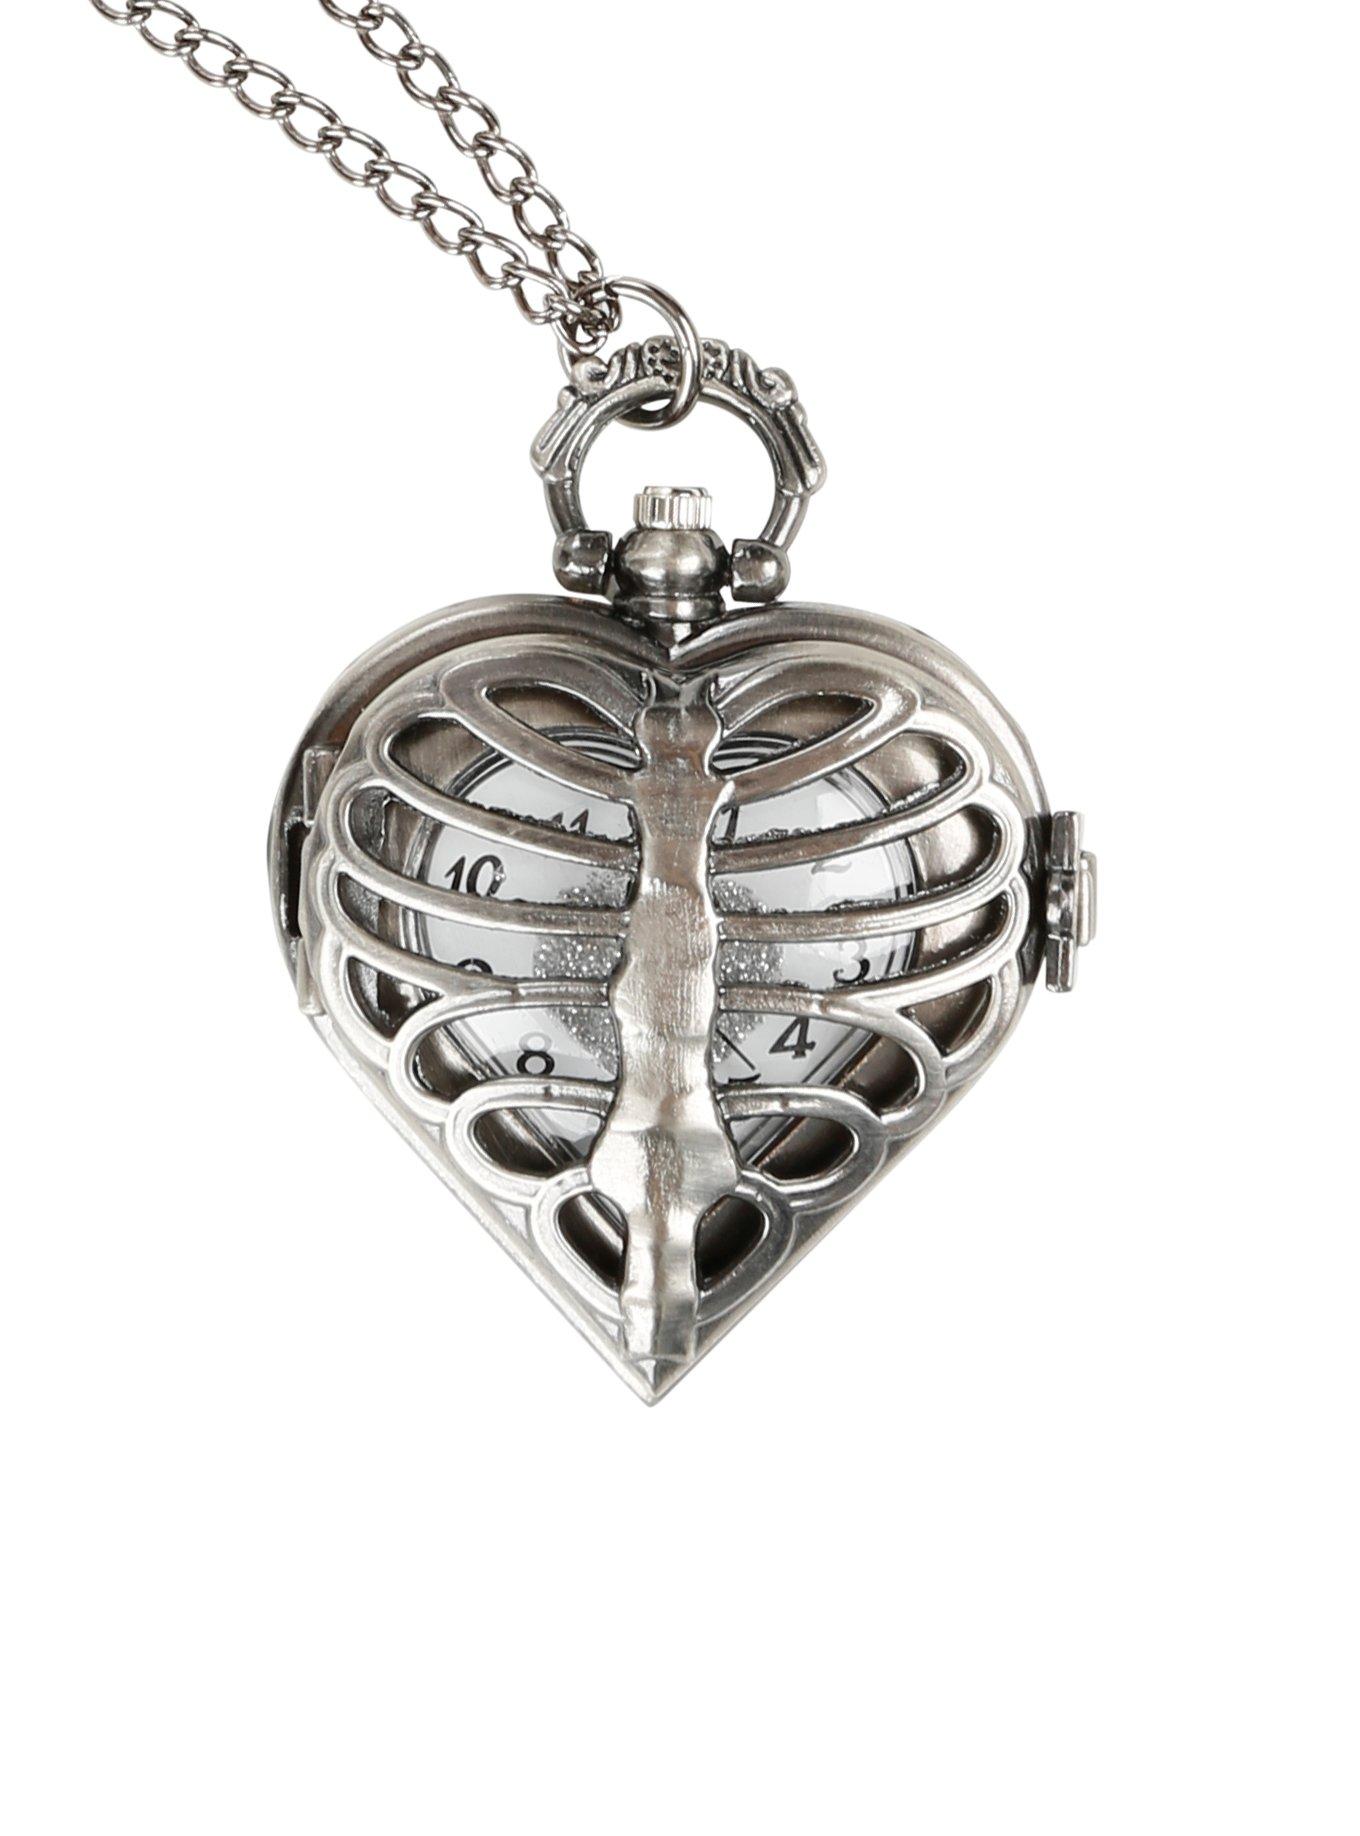 Burnished Silver Tone Heart Rib Cage Pocket Watch Necklace